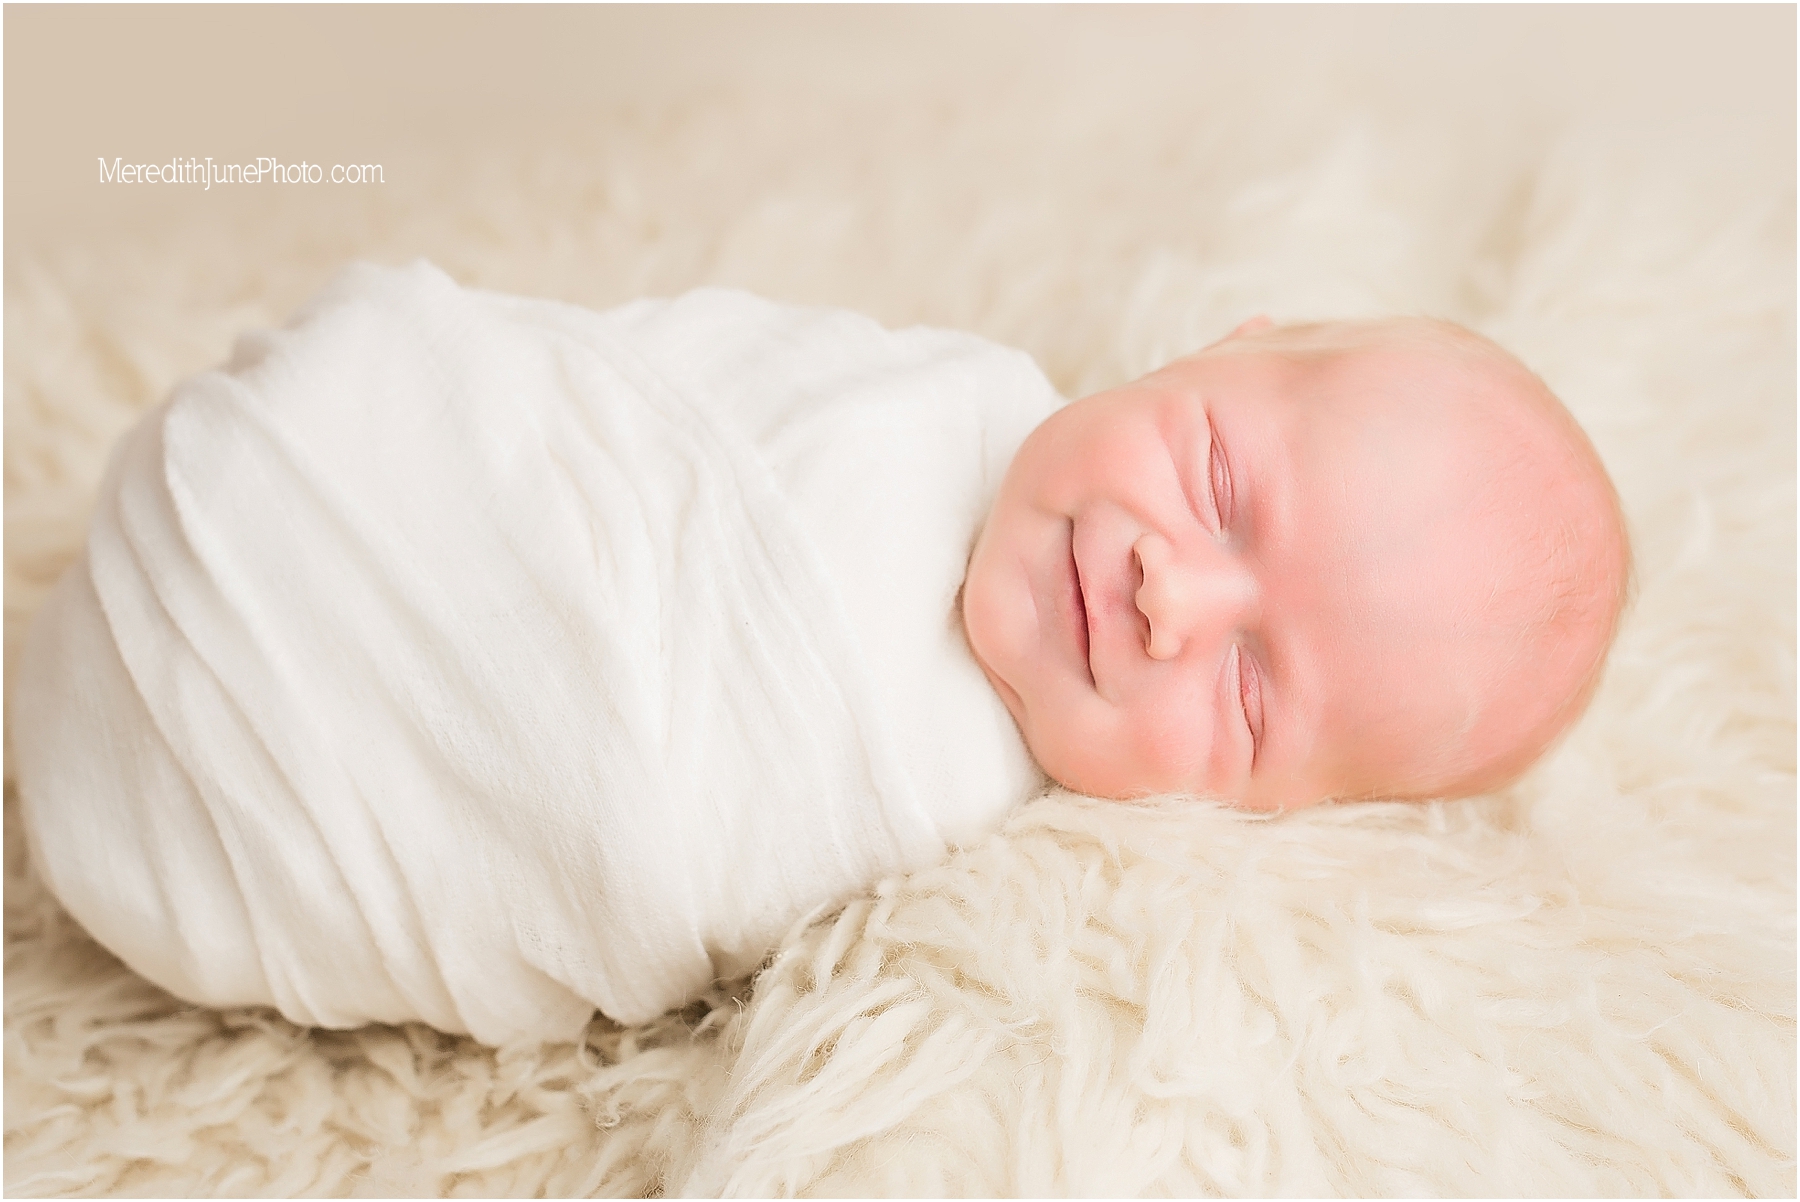 Newborn photo session for baby boy Miller